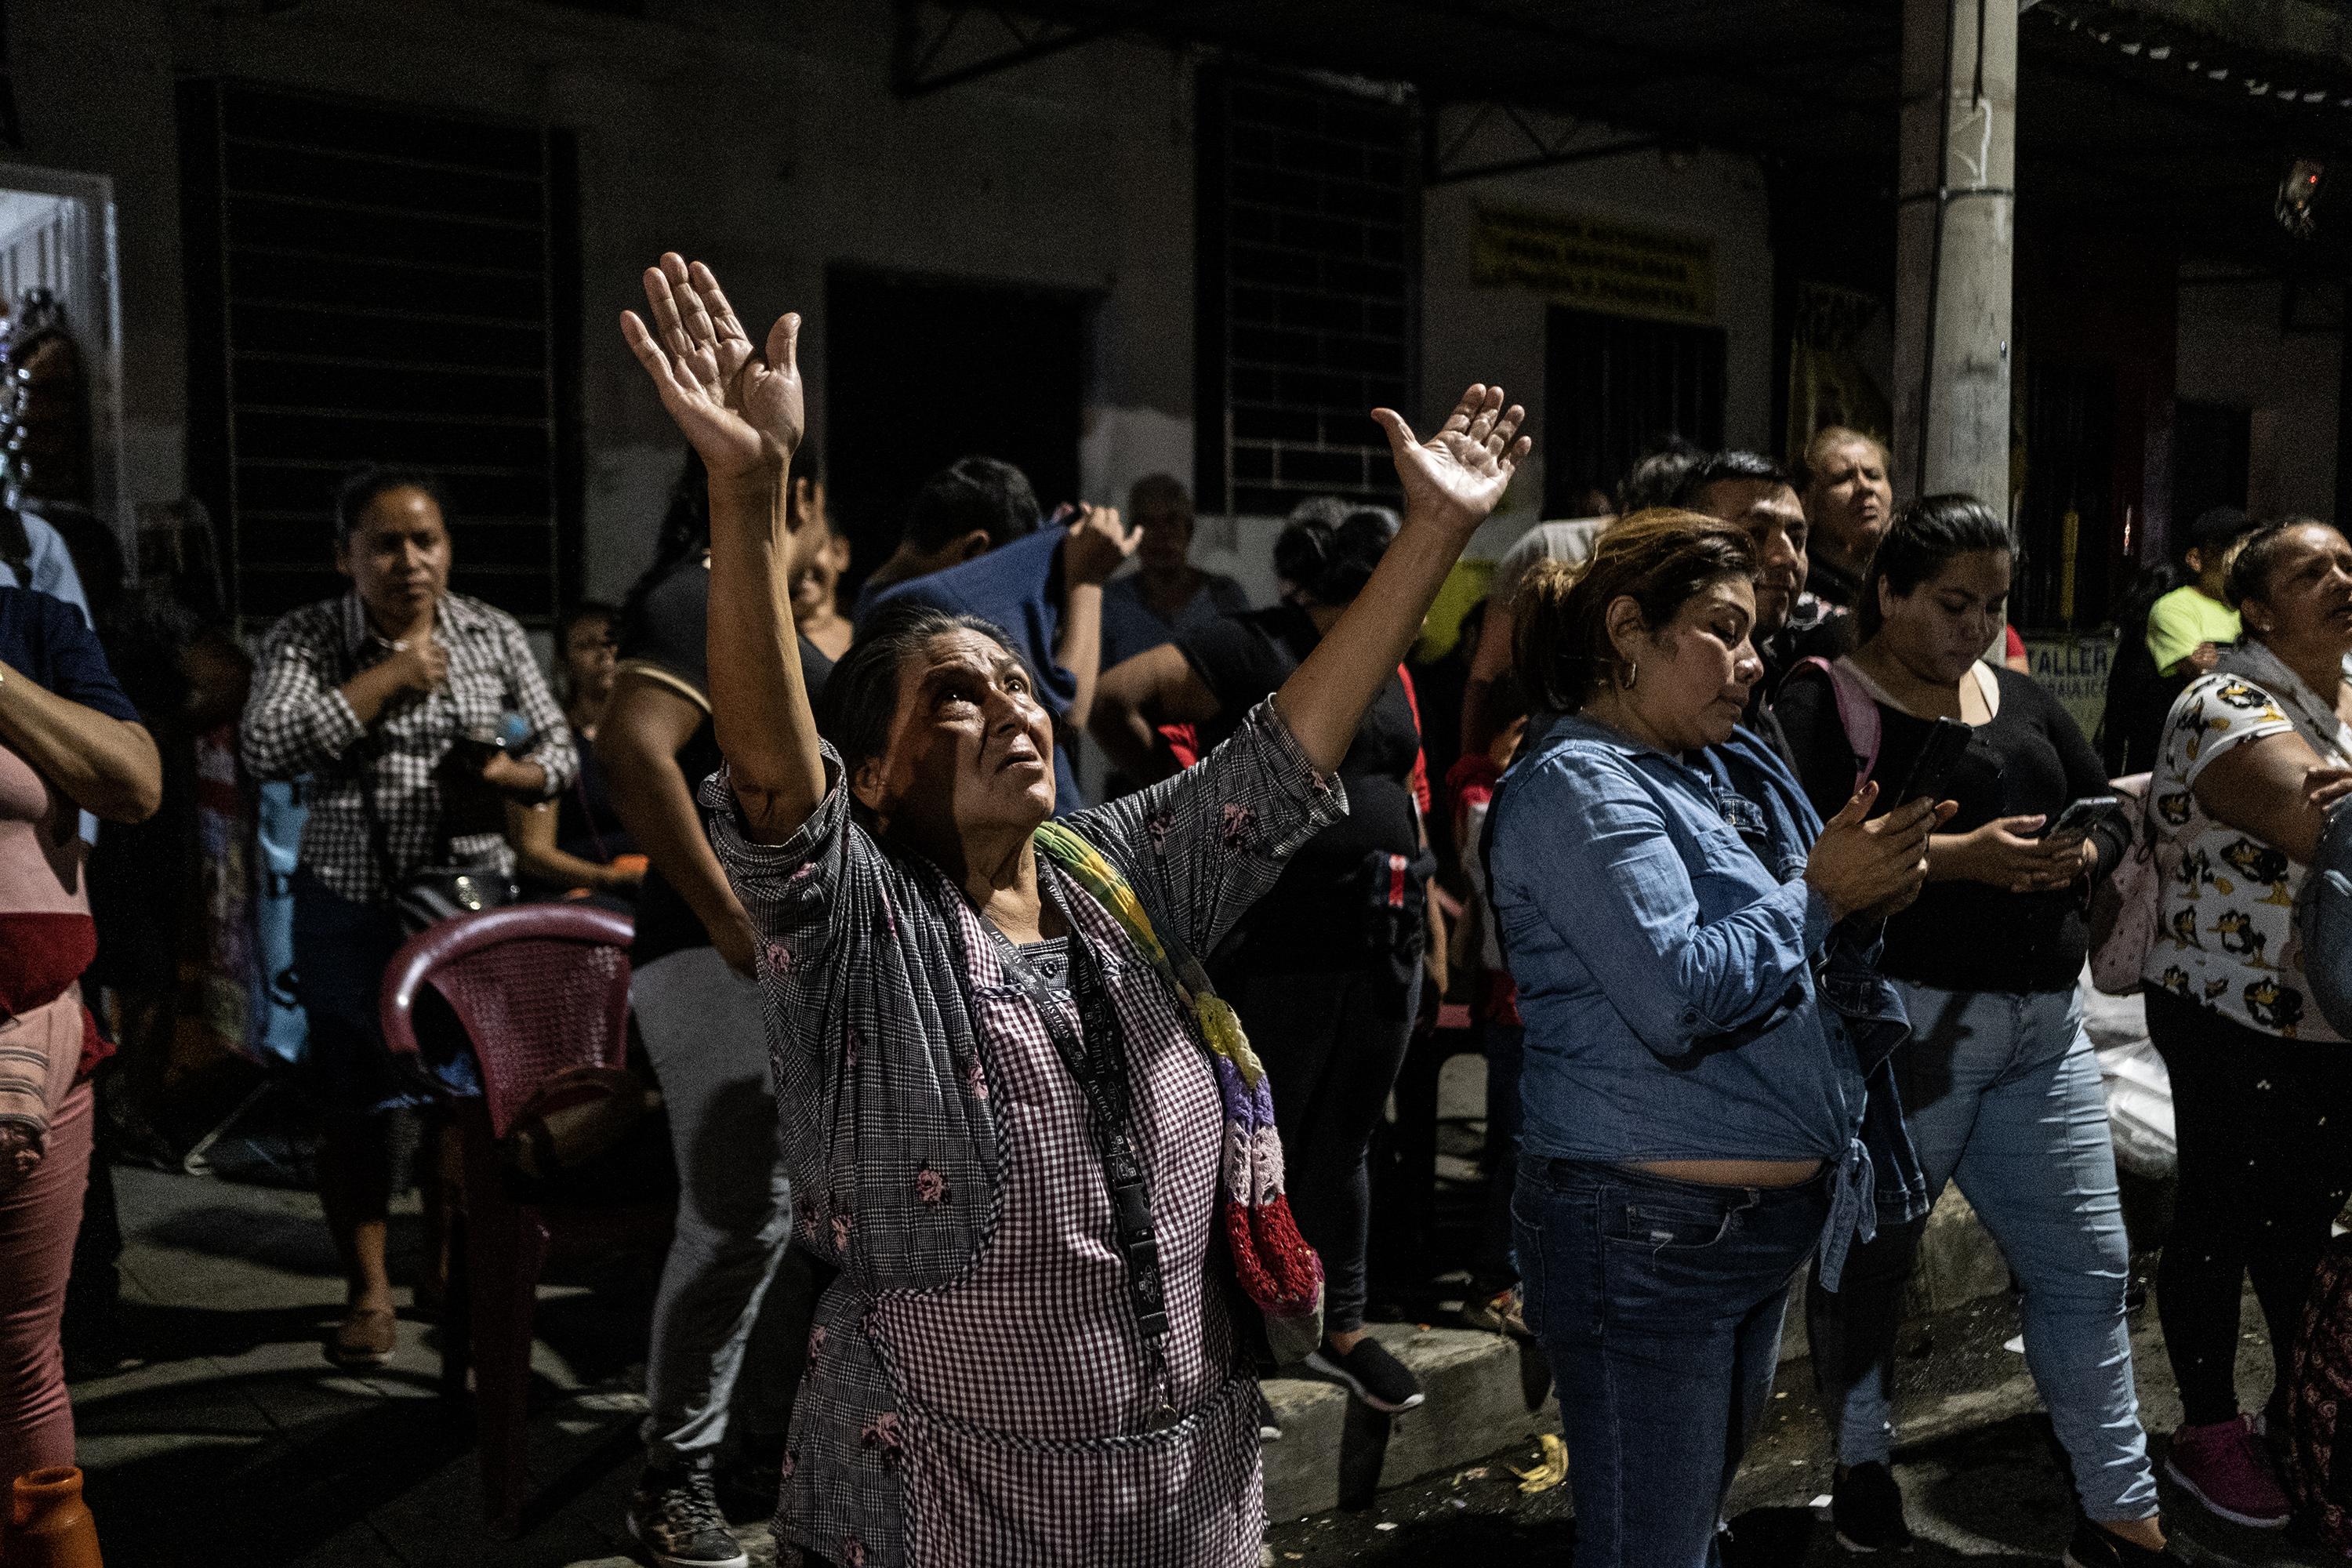 Relatives of detainees under the state of exception hold vigil outside El Penalito, a prison in San Salvador, hoping for the release of their loved ones. Photo: Carlos Barrera/El Faro